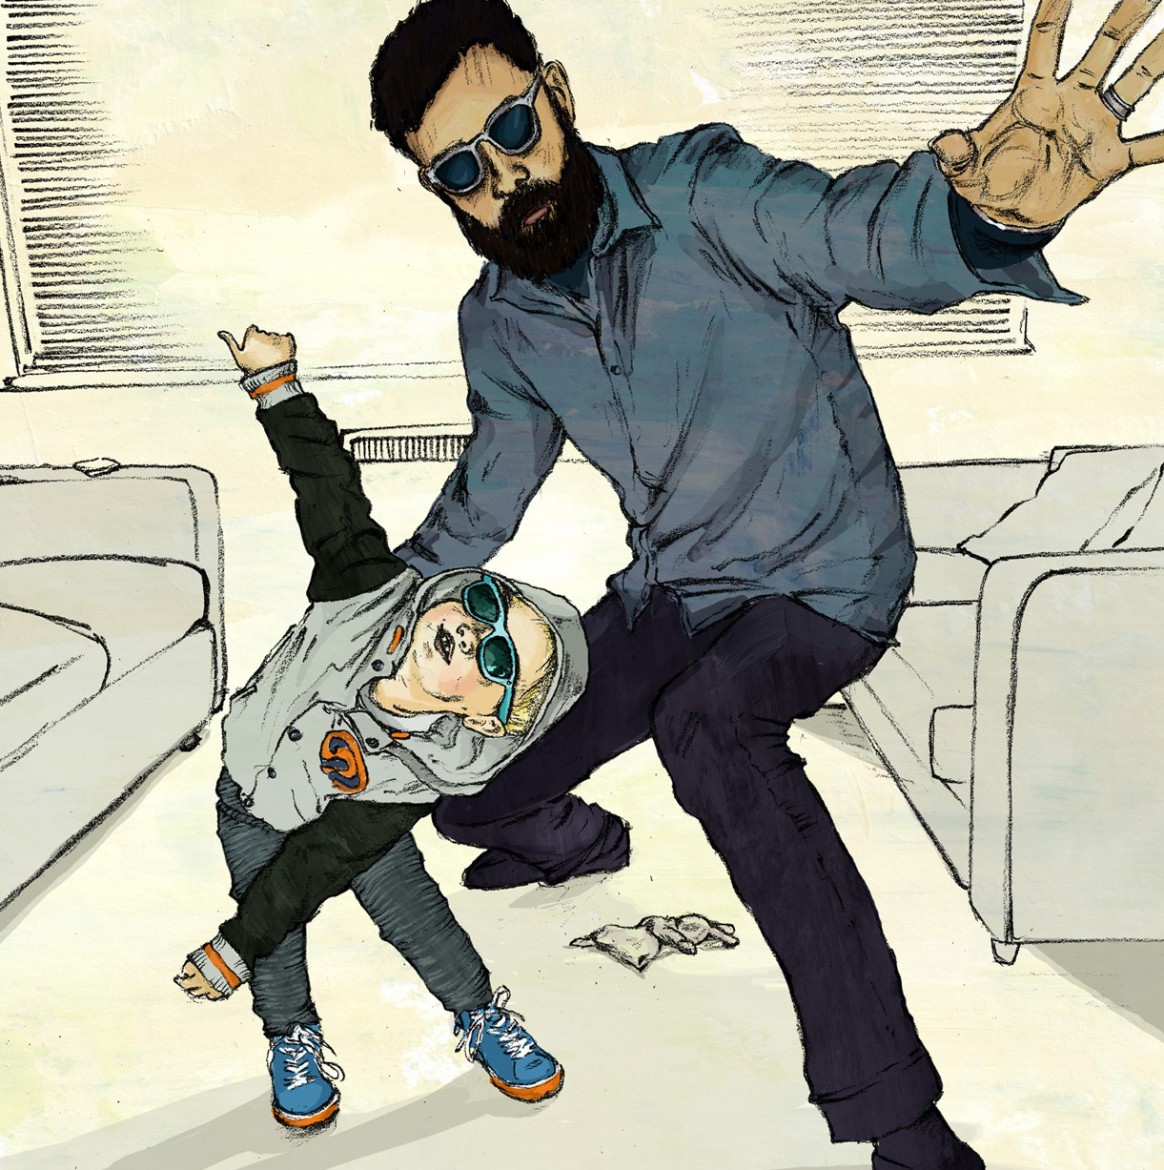 Illustration of father and son in shades acting cool together